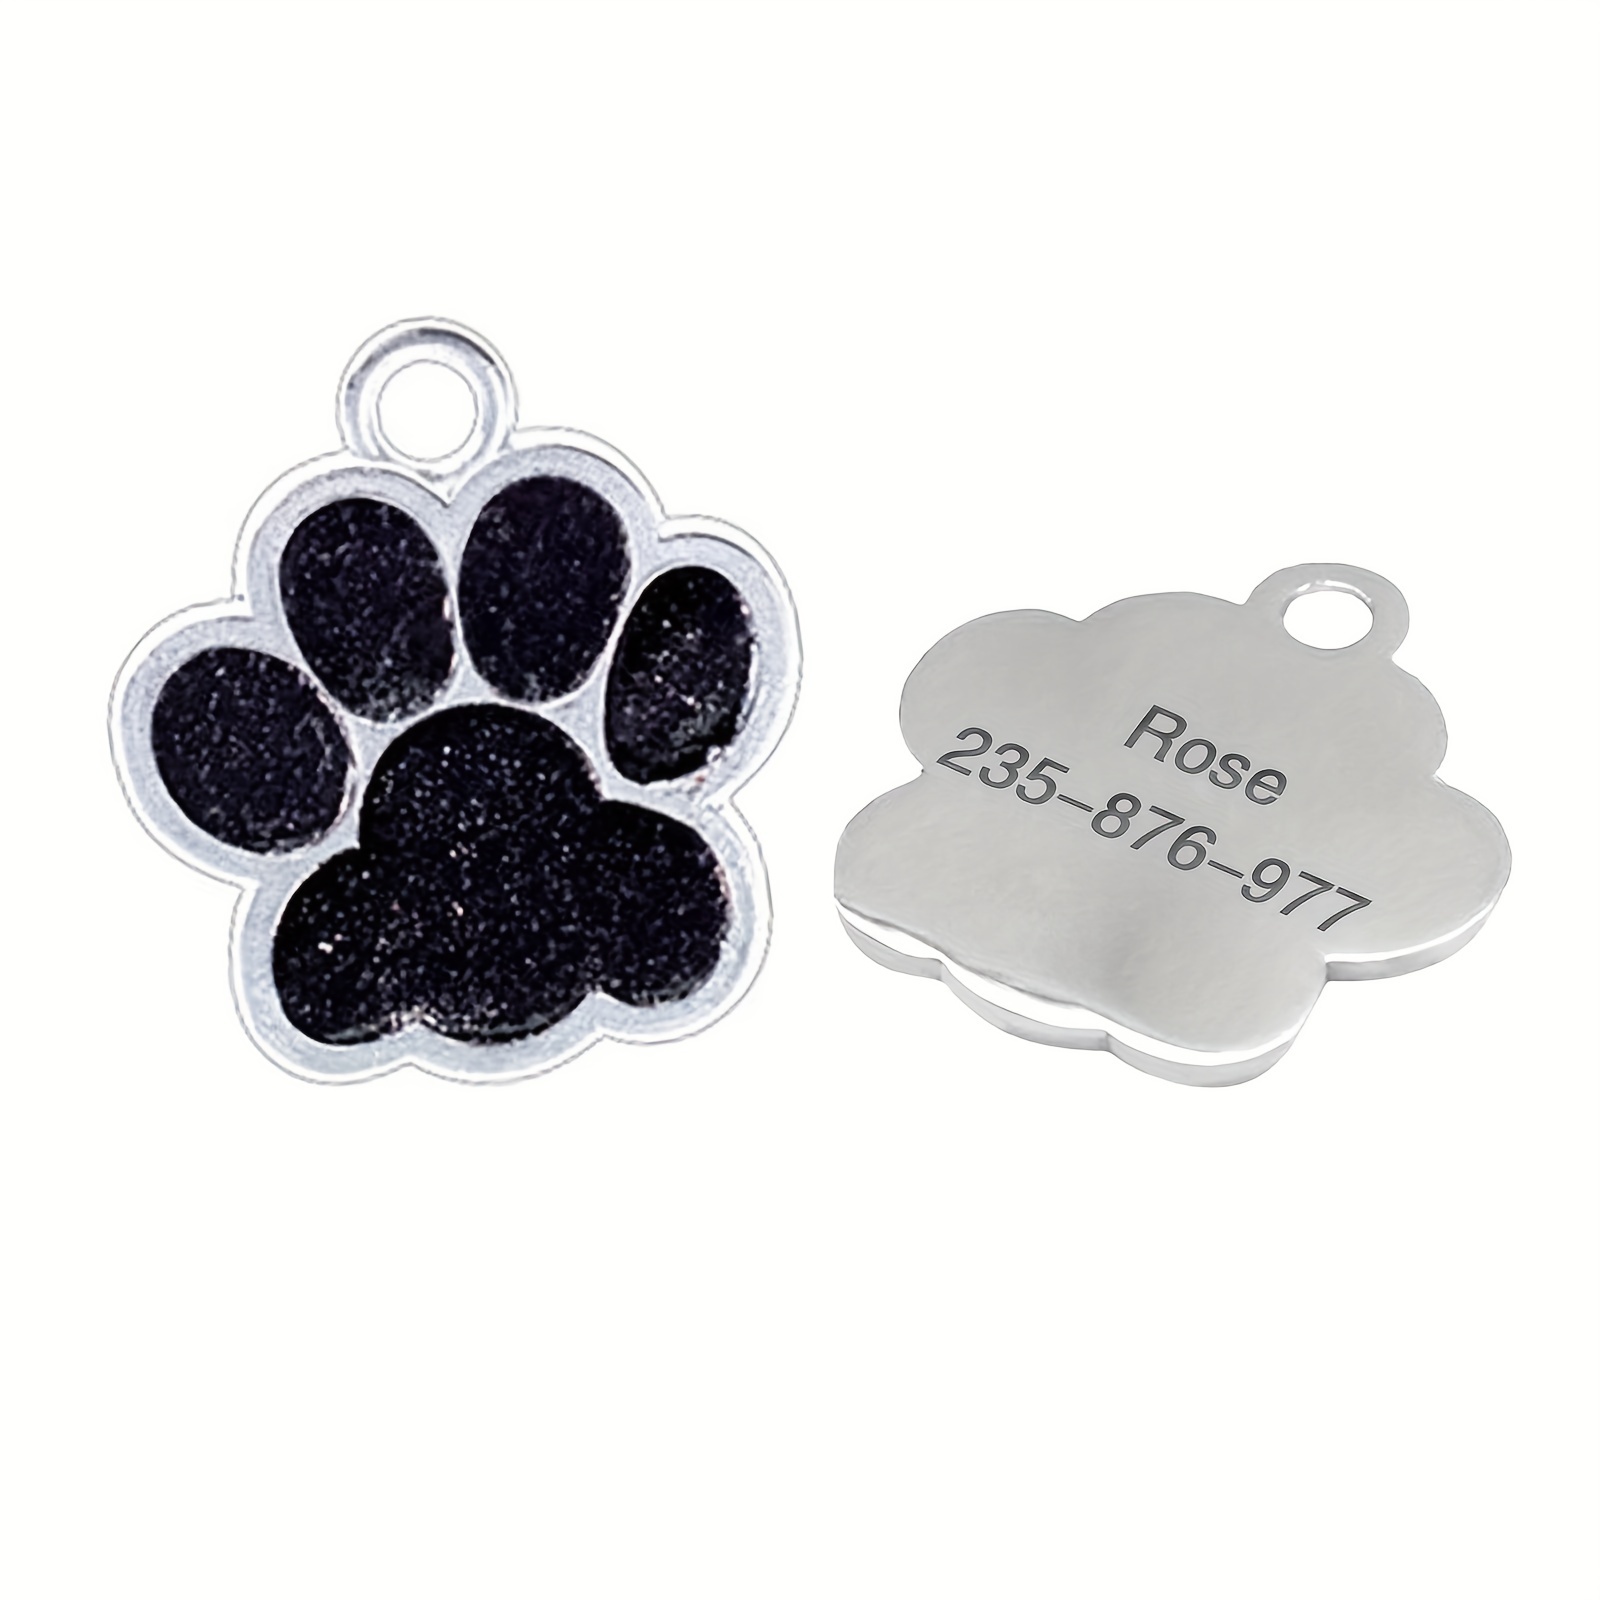 

Personalized Pet Id Tag With Black Paw Print Design - Anti-lost Dog Tag For Small, Medium, And Large Dogs And Cats - Durable And Stylish Pet Accessory